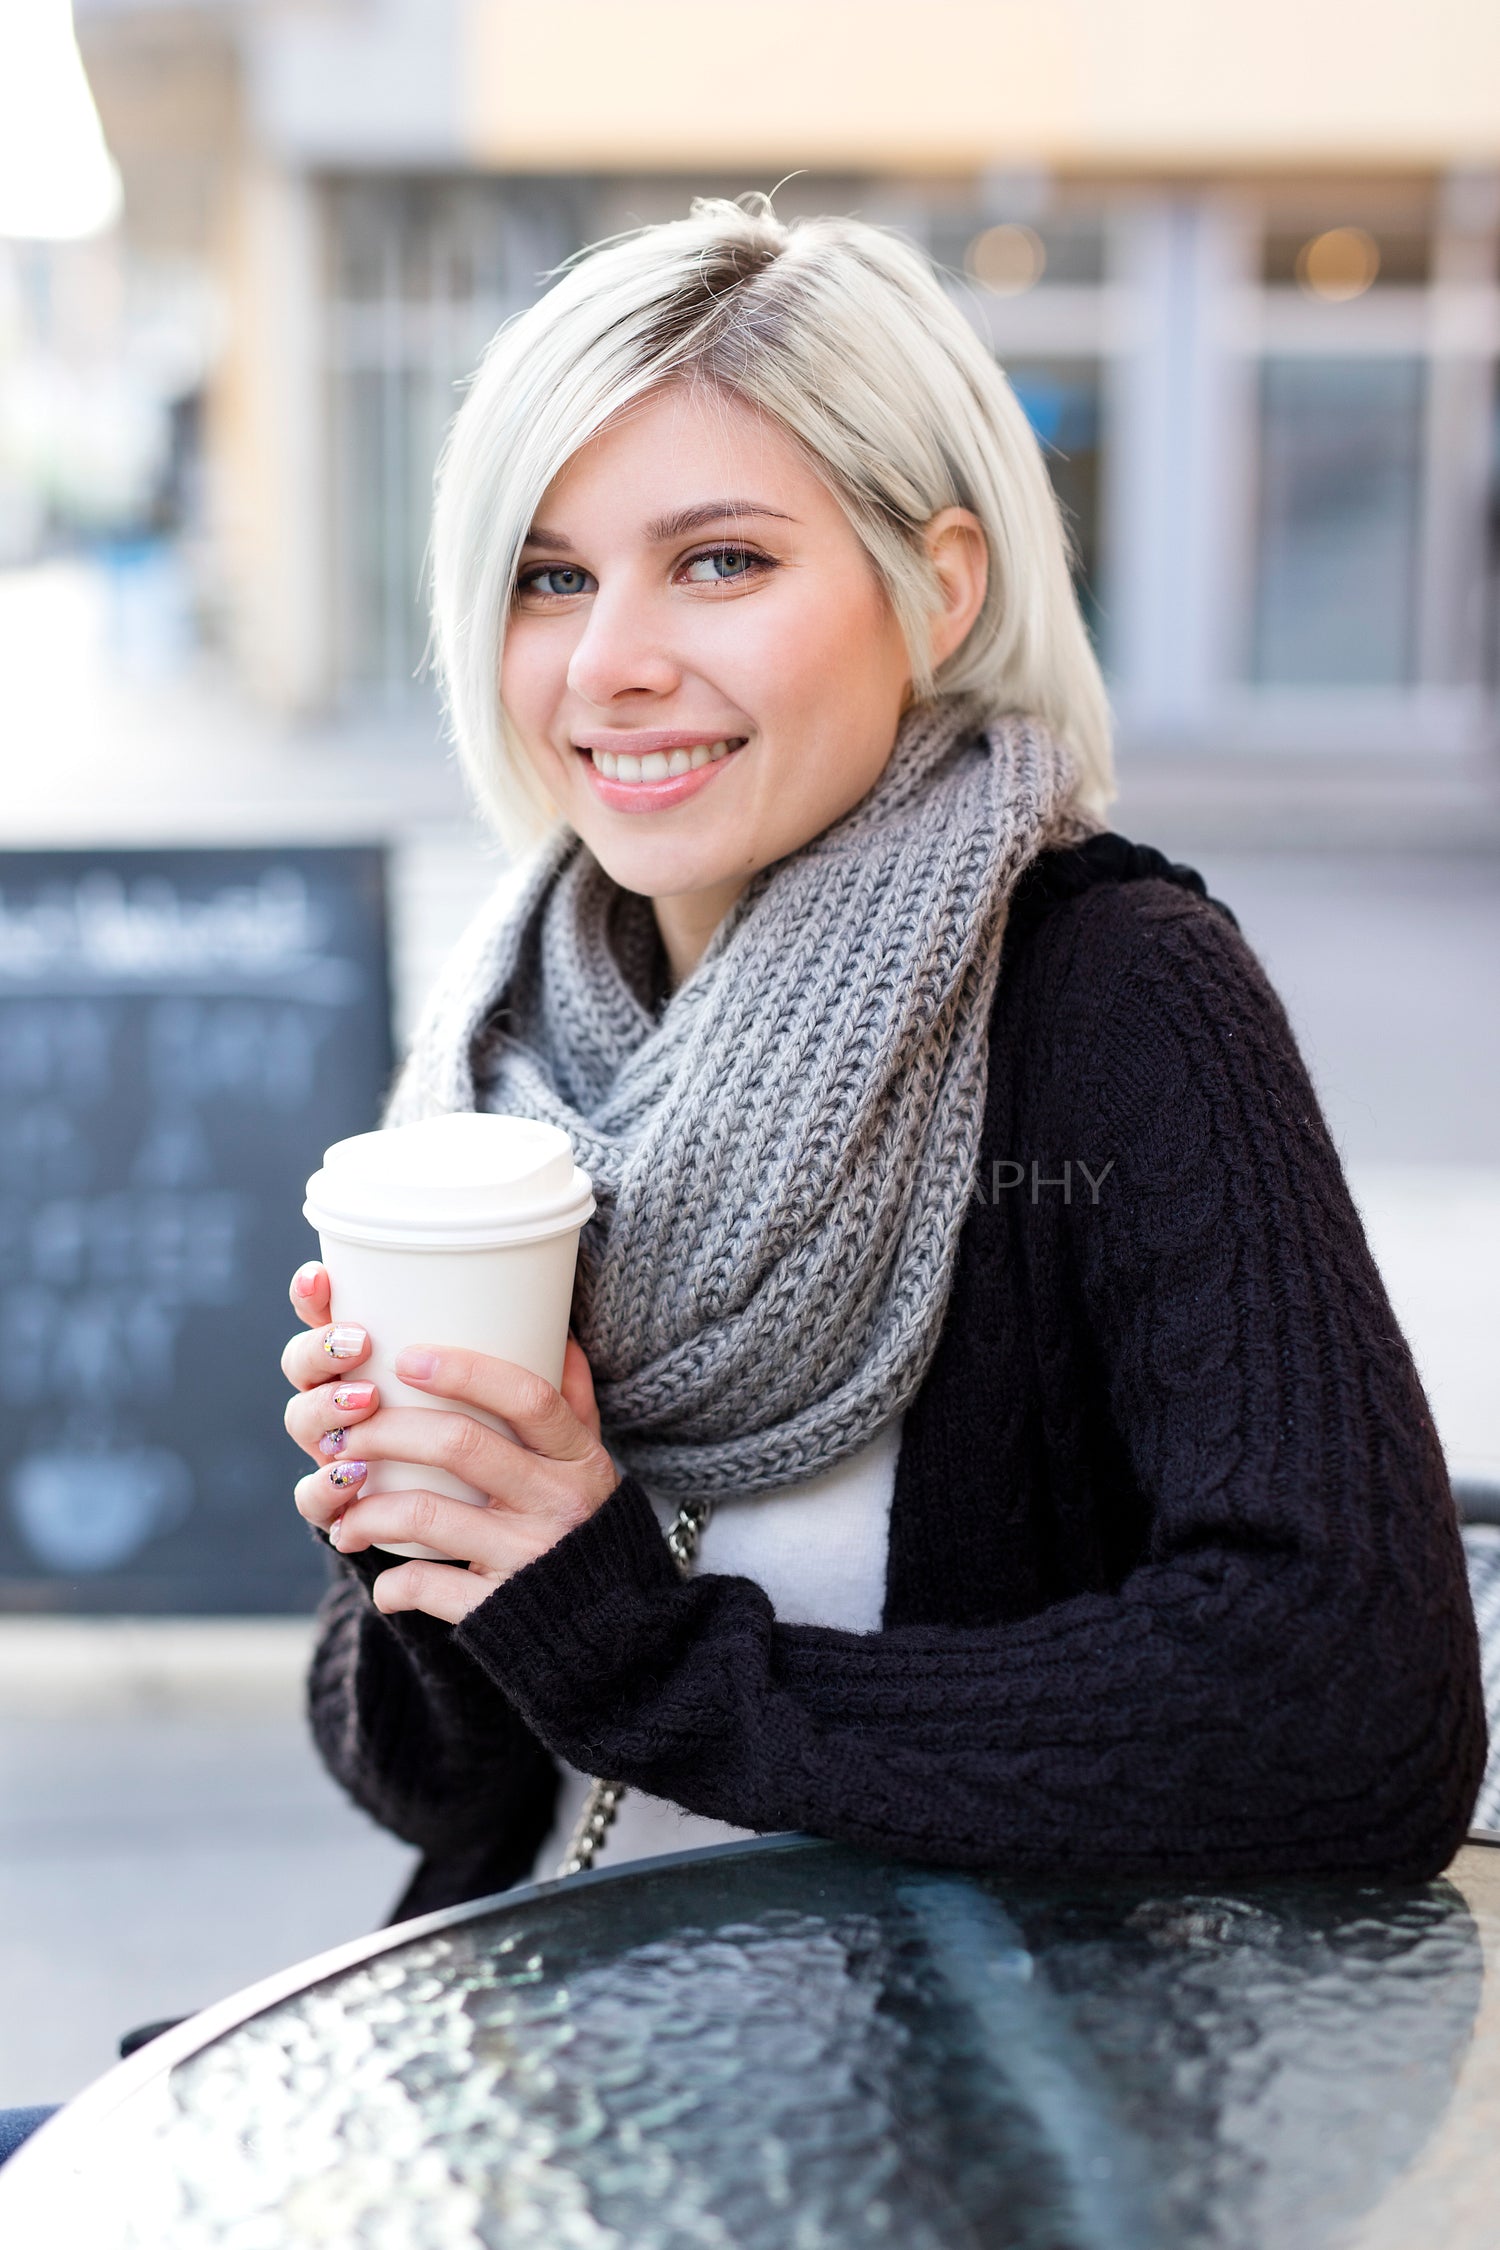 Smiling blonde woman drinking coffee outdoor at cafe